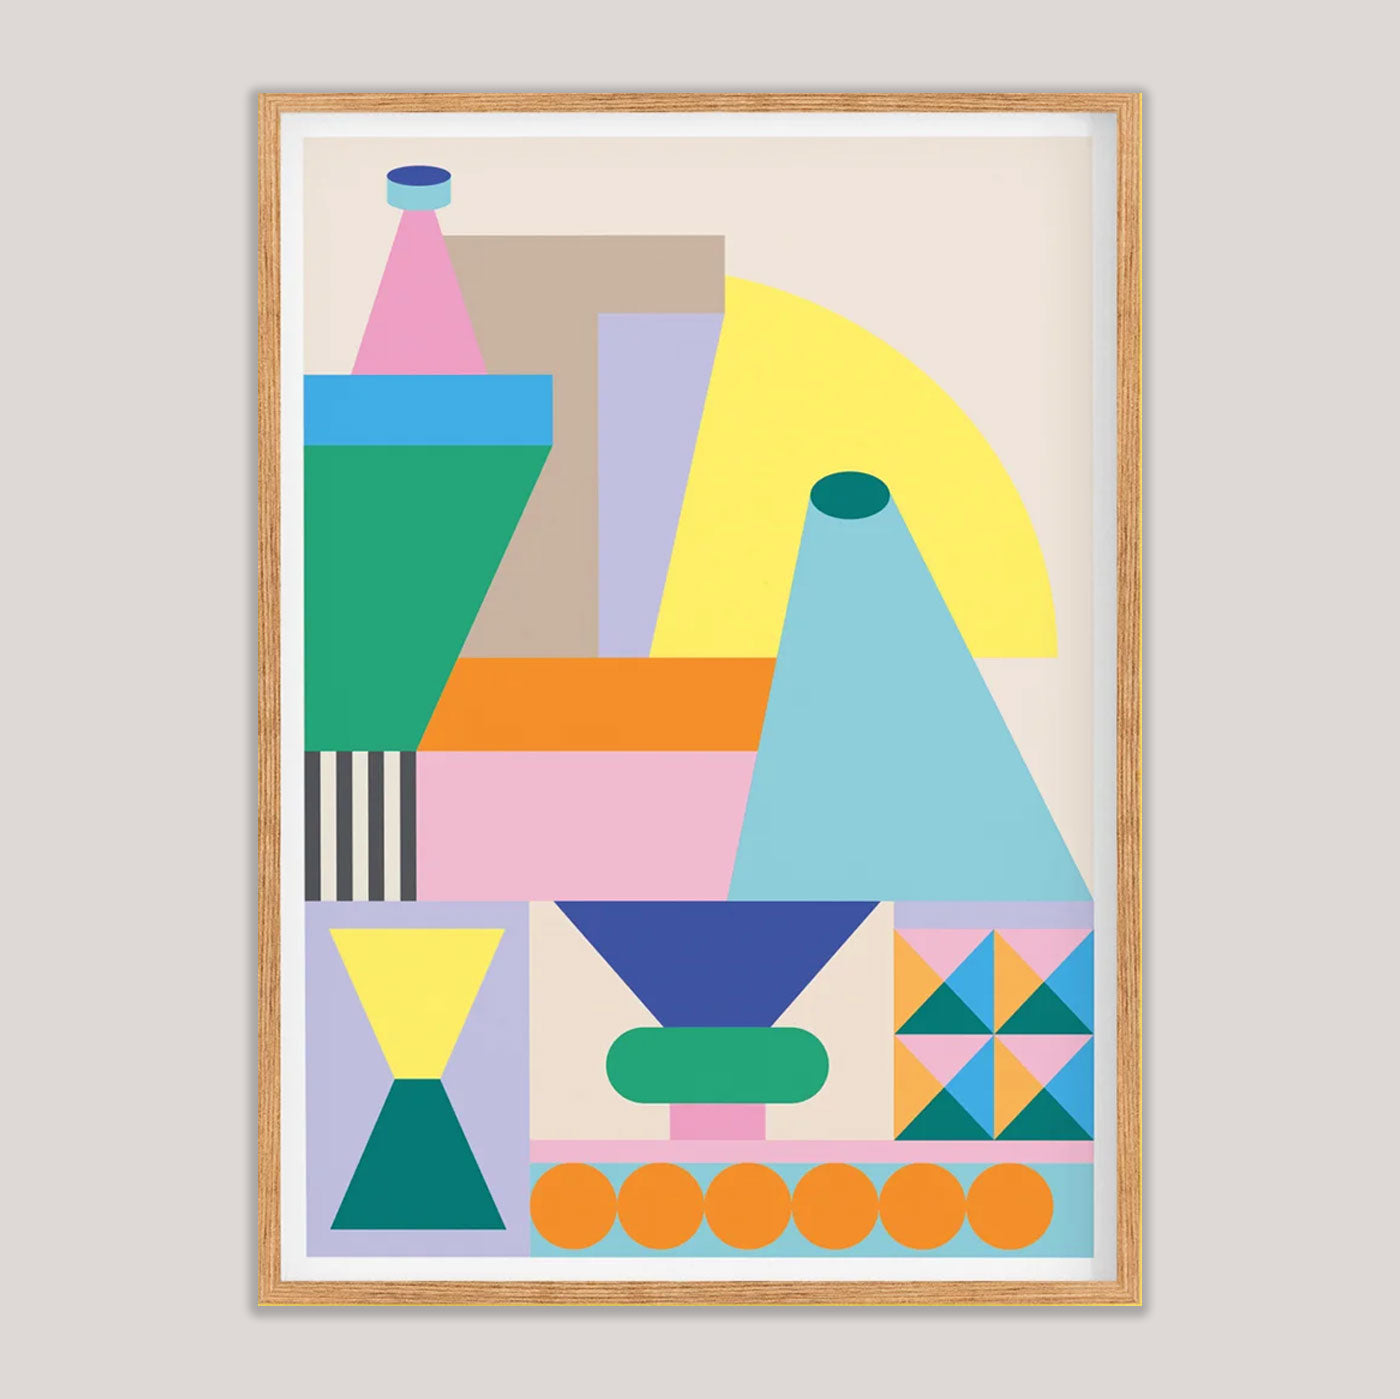 Biscuit Factory A2 Print | Emer Tumilty